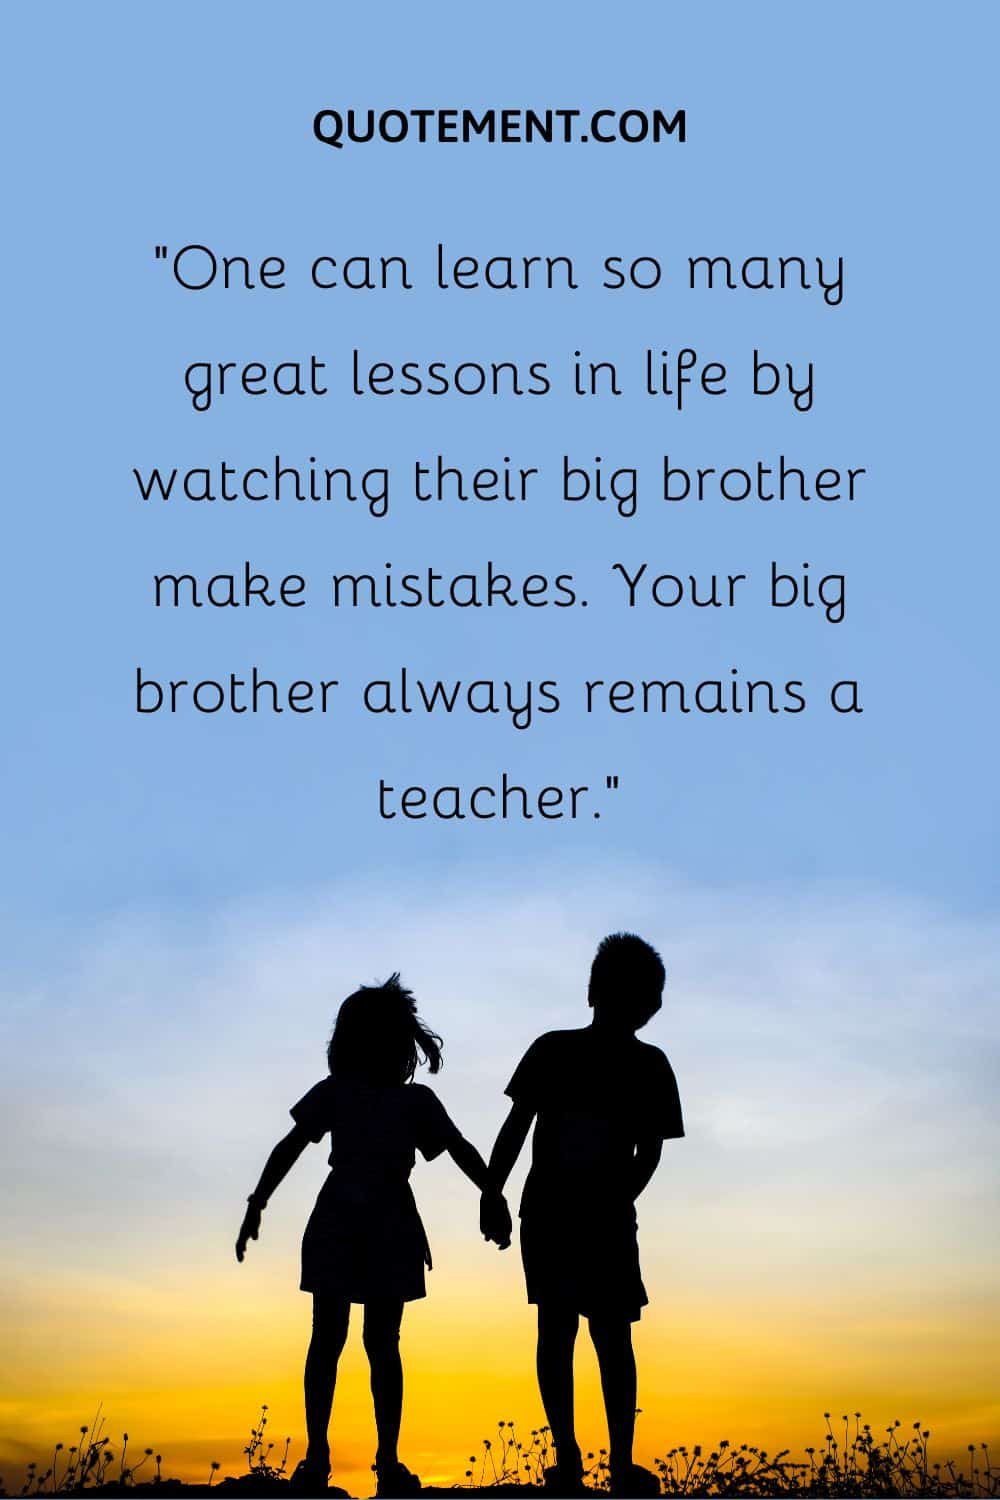 “One can learn so many great lessons in life by watching their big brother make mistakes. Your big brother always remains a teacher.”